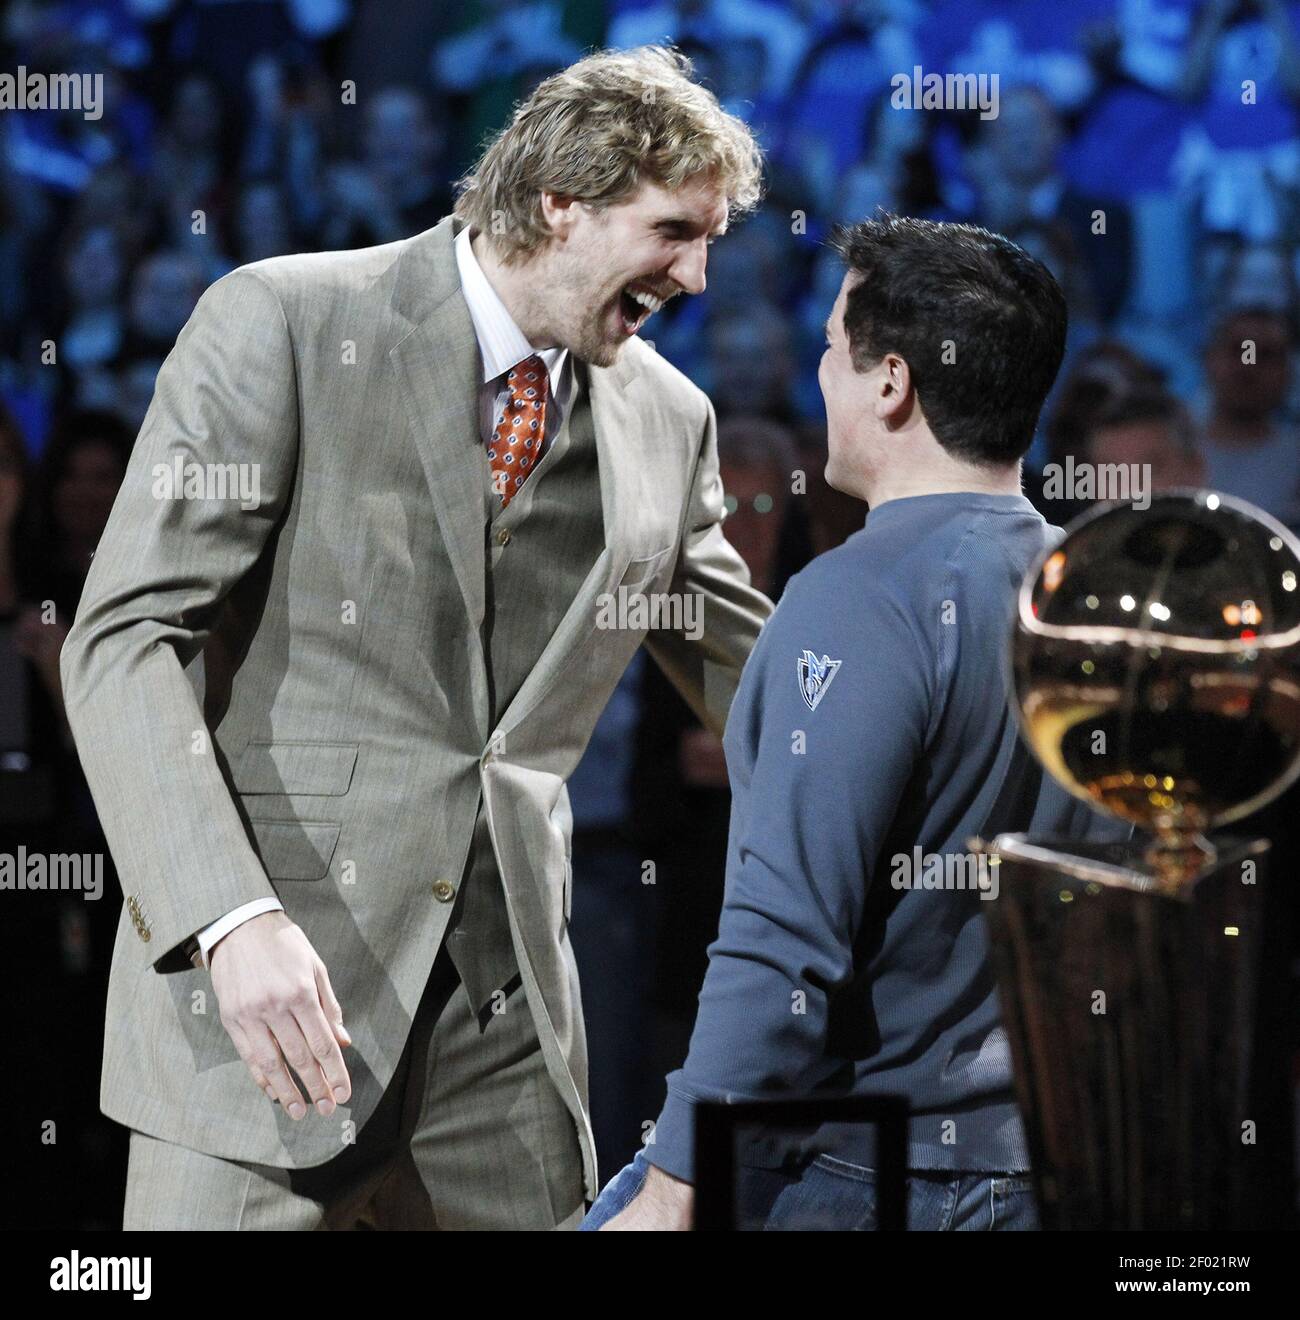 The Dallas Mavericks' Dirk Nowitzki, left, is greeted by owner Mark Cuban  before receiving his championship ring before the team plays host to the  Minnesota Timberwolves at the American Airlines Center in